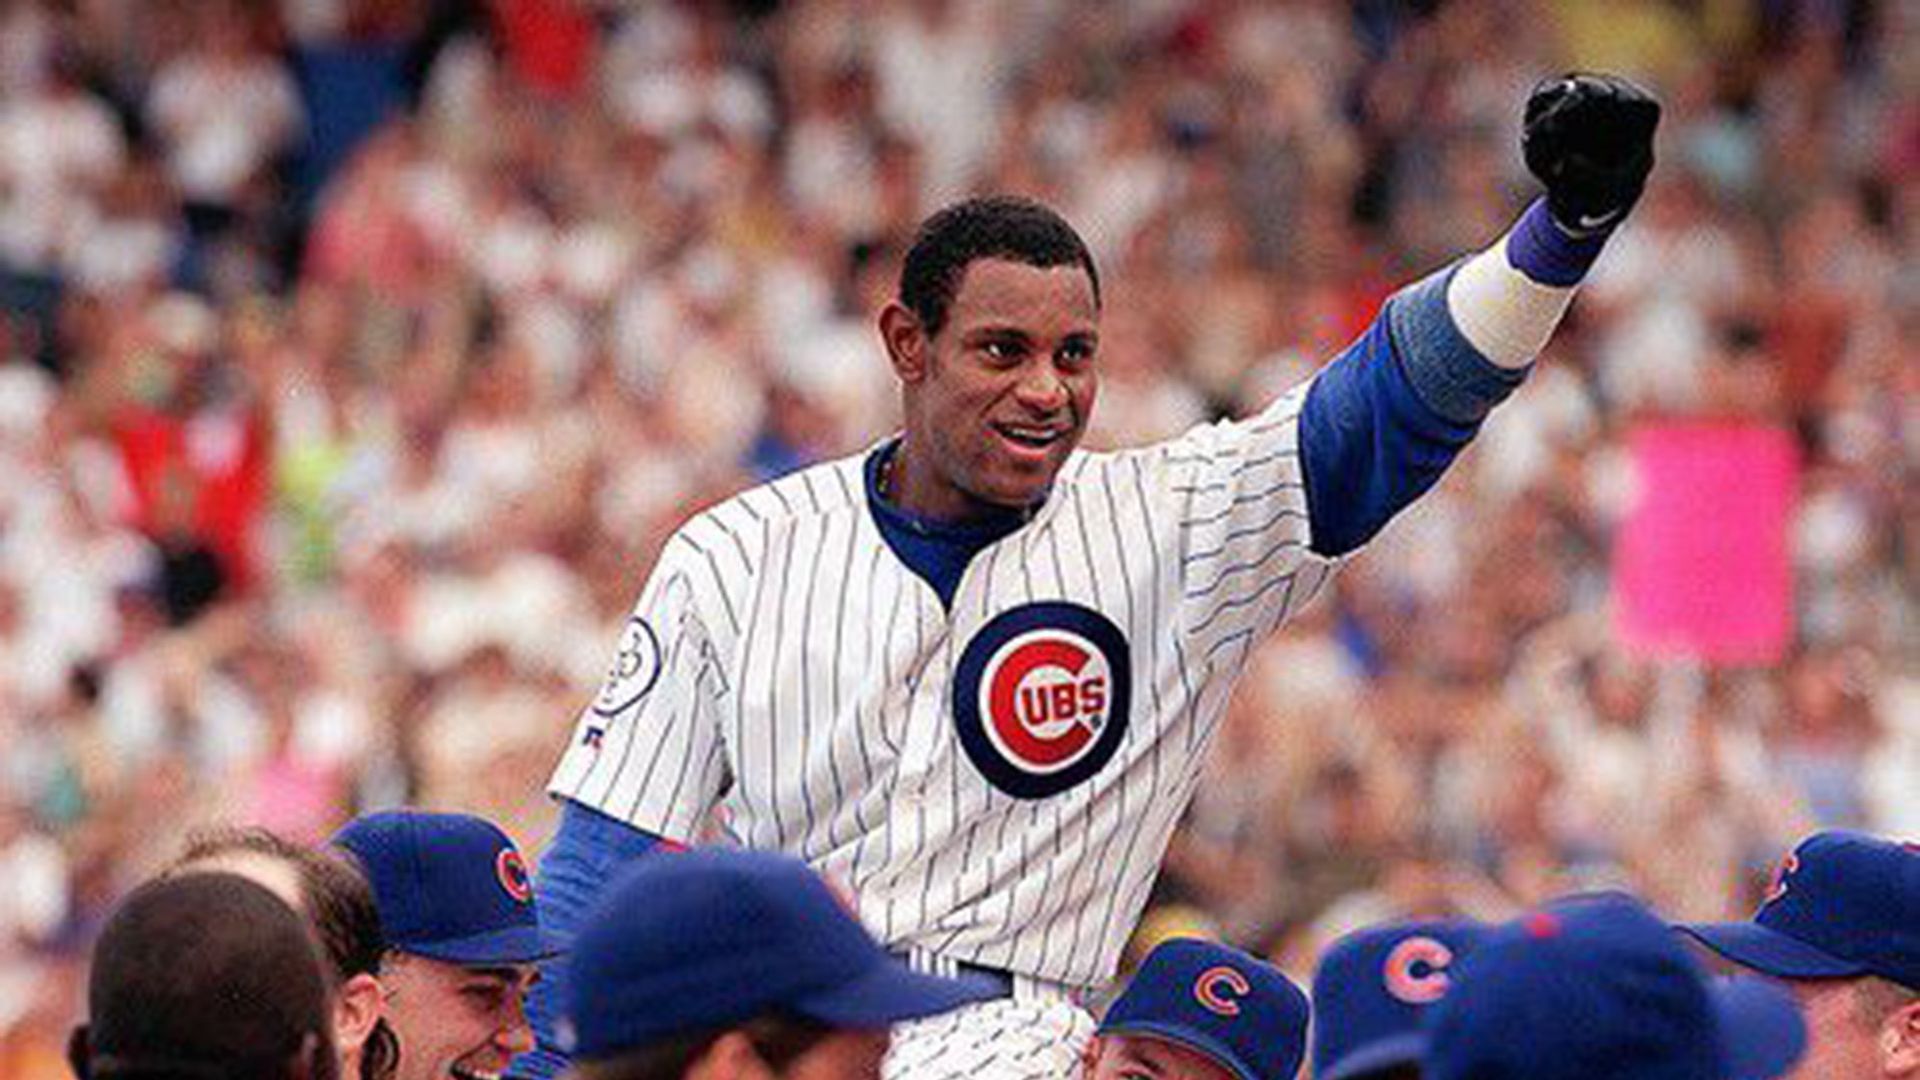 Sammy Sosa, Chicago Cubs during the record breaking season in 1998